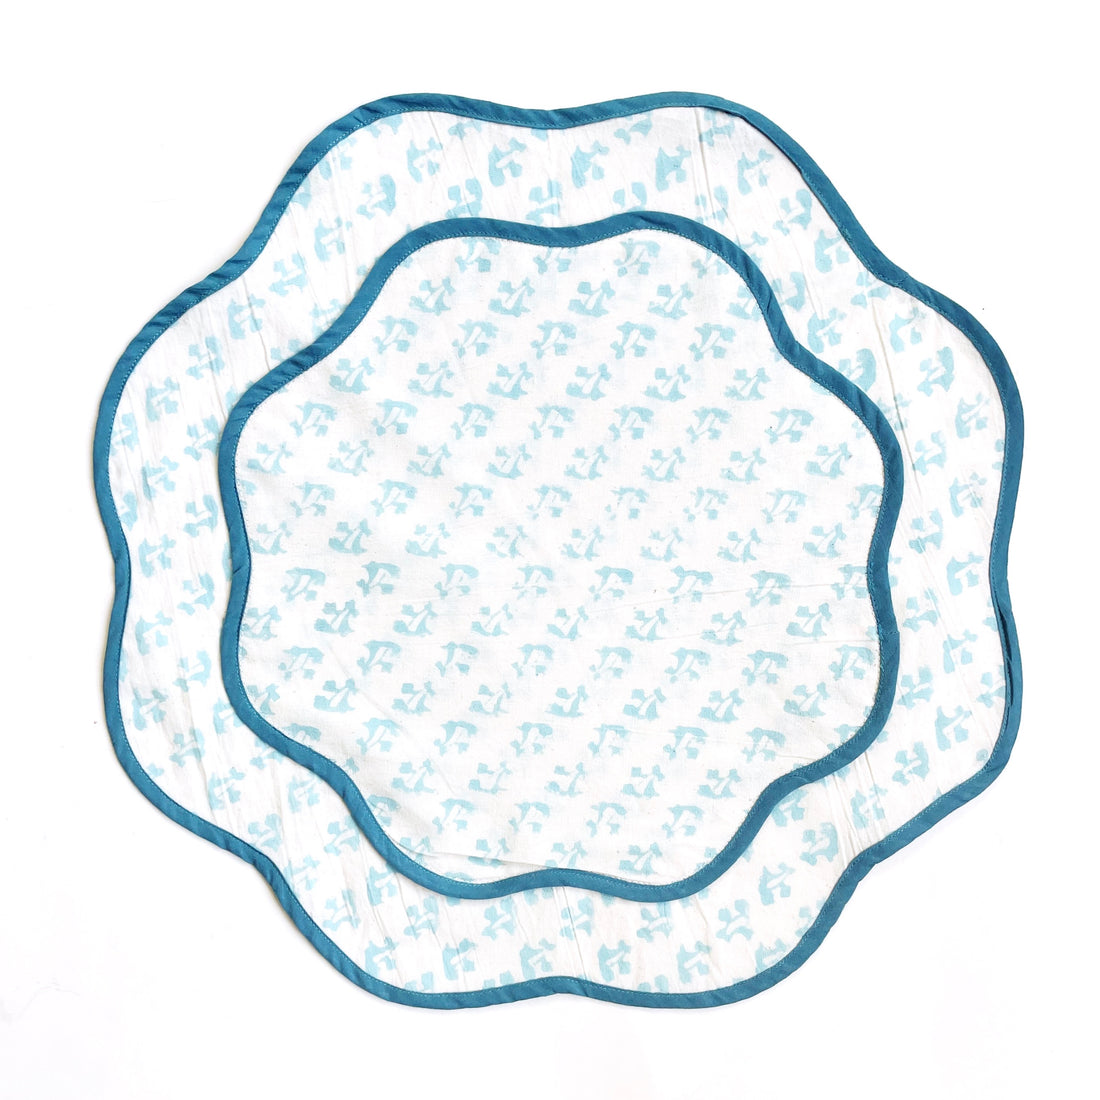 THE SCALLOPED TEAL PLACEMAT